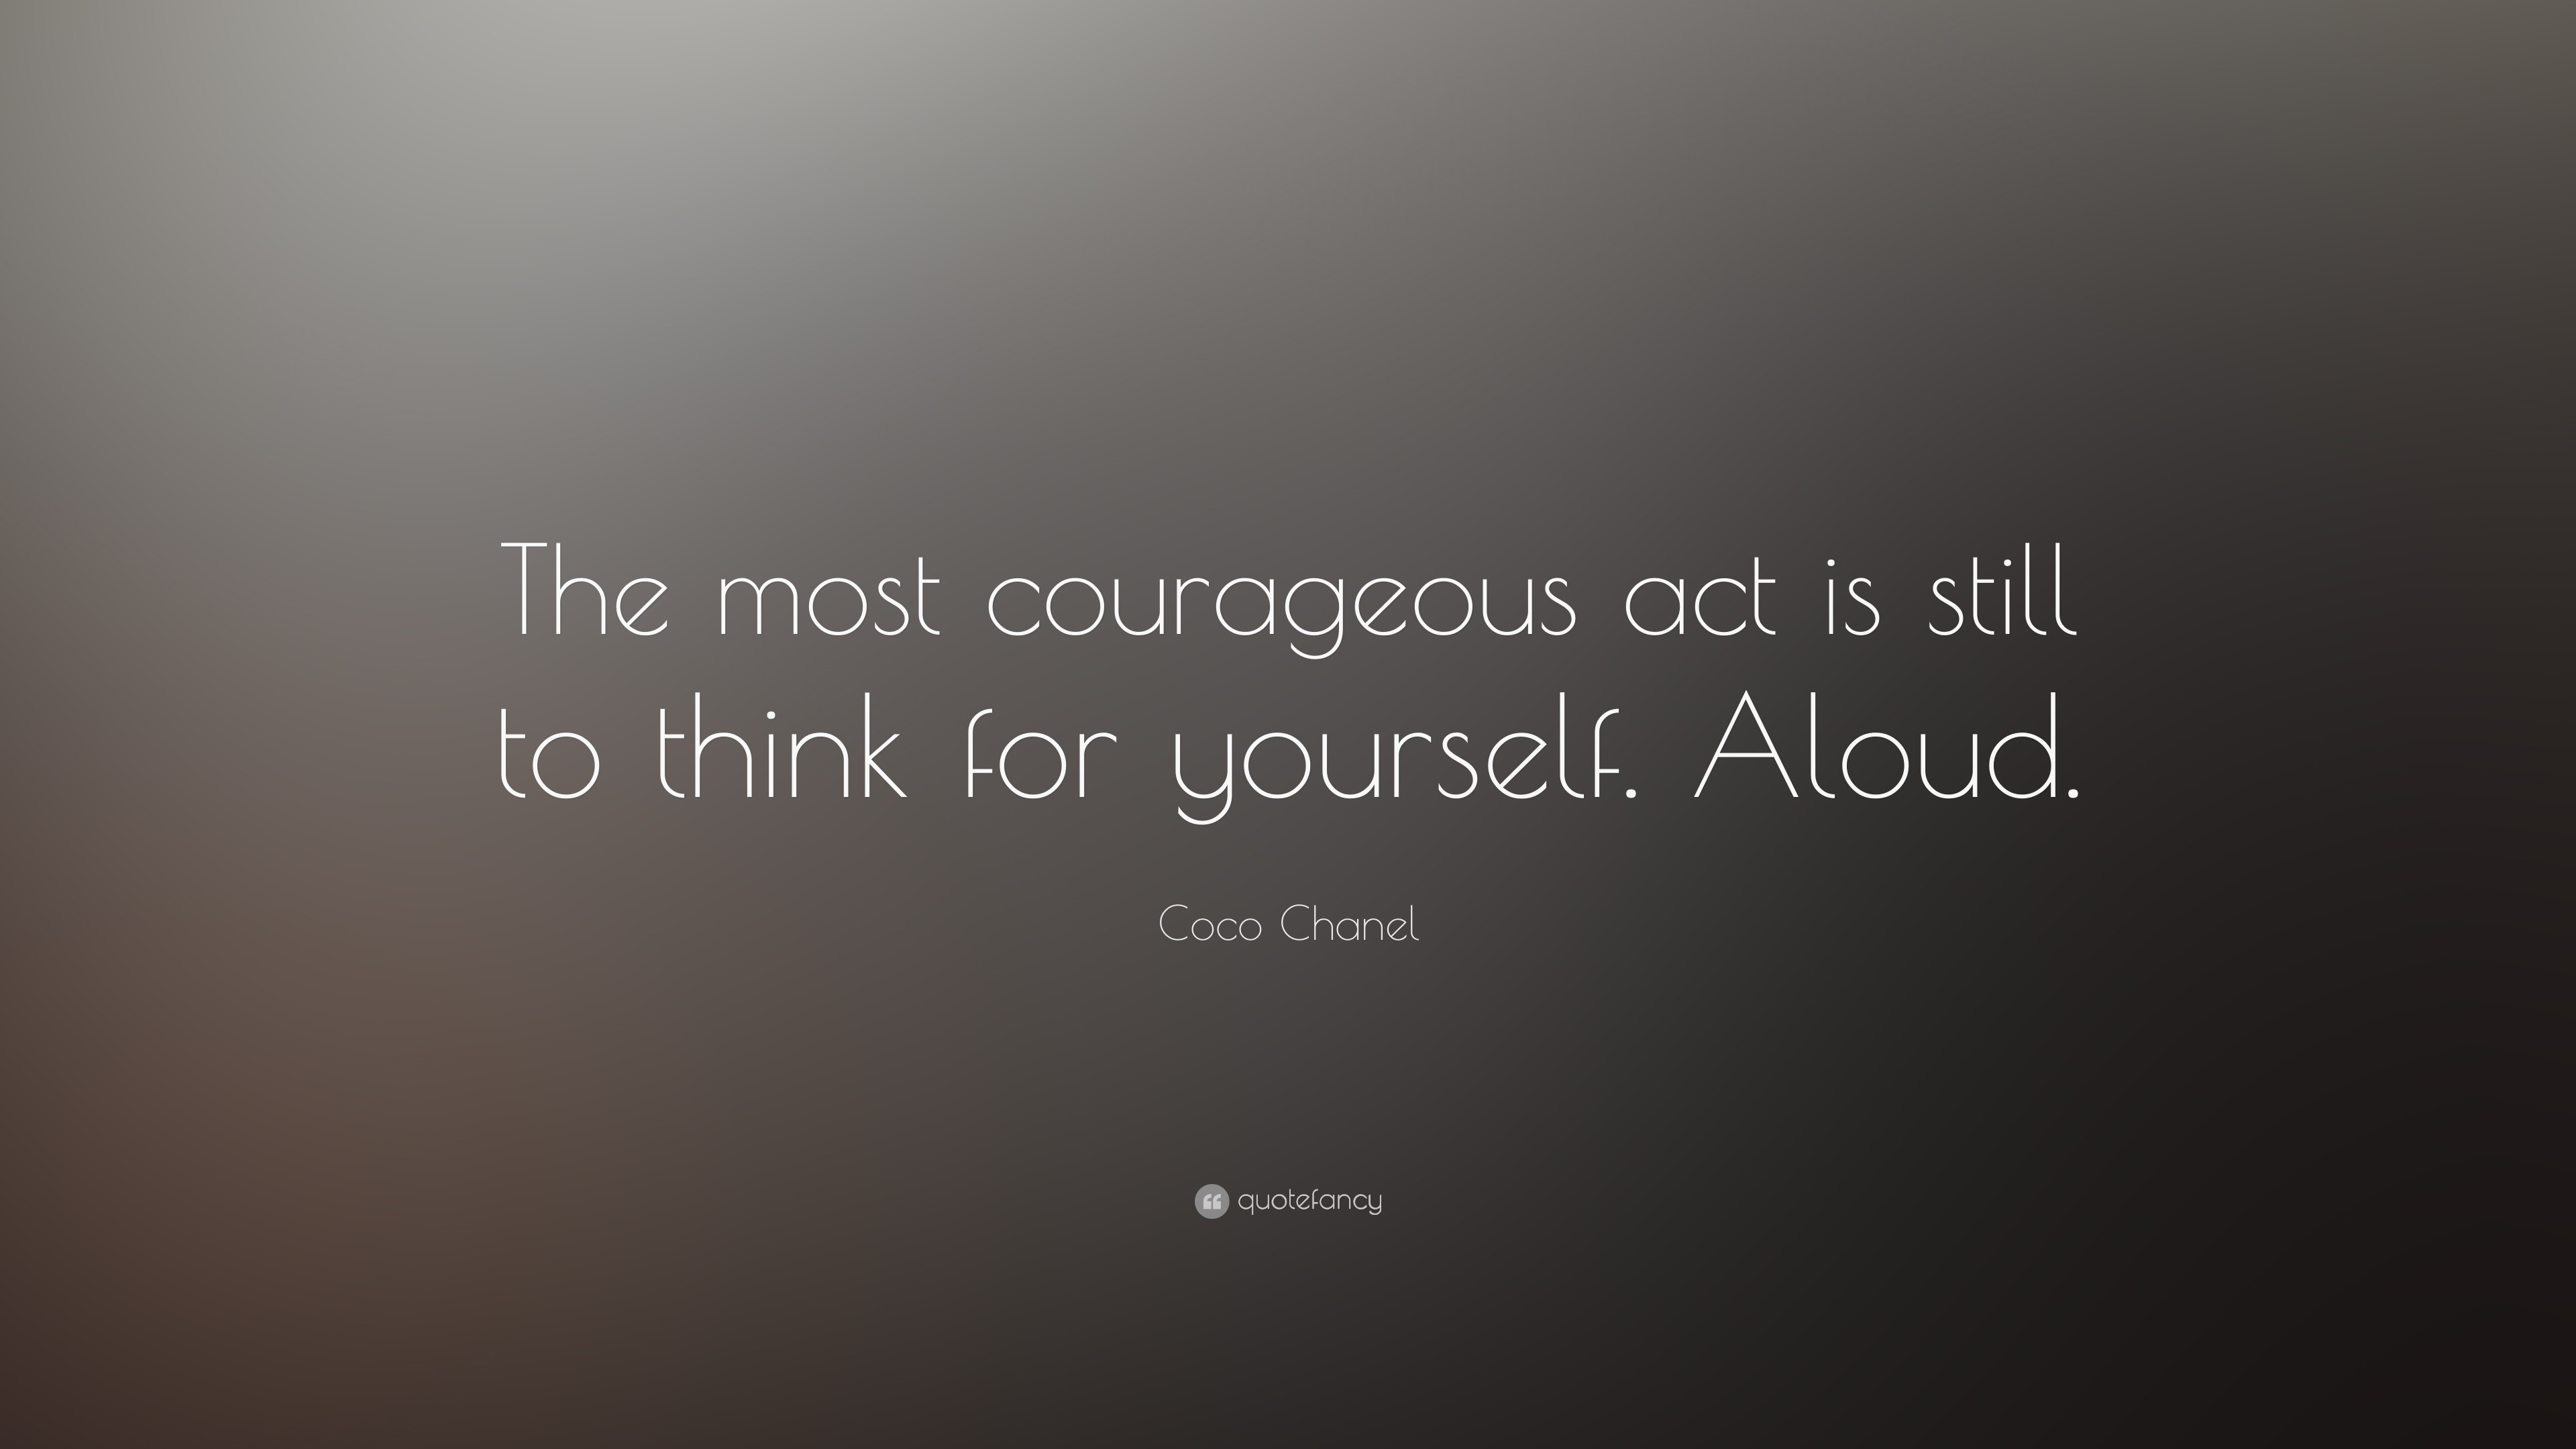 3840x2160 Coco Chanel Quote: “The most courageous act is still to think for yourself.